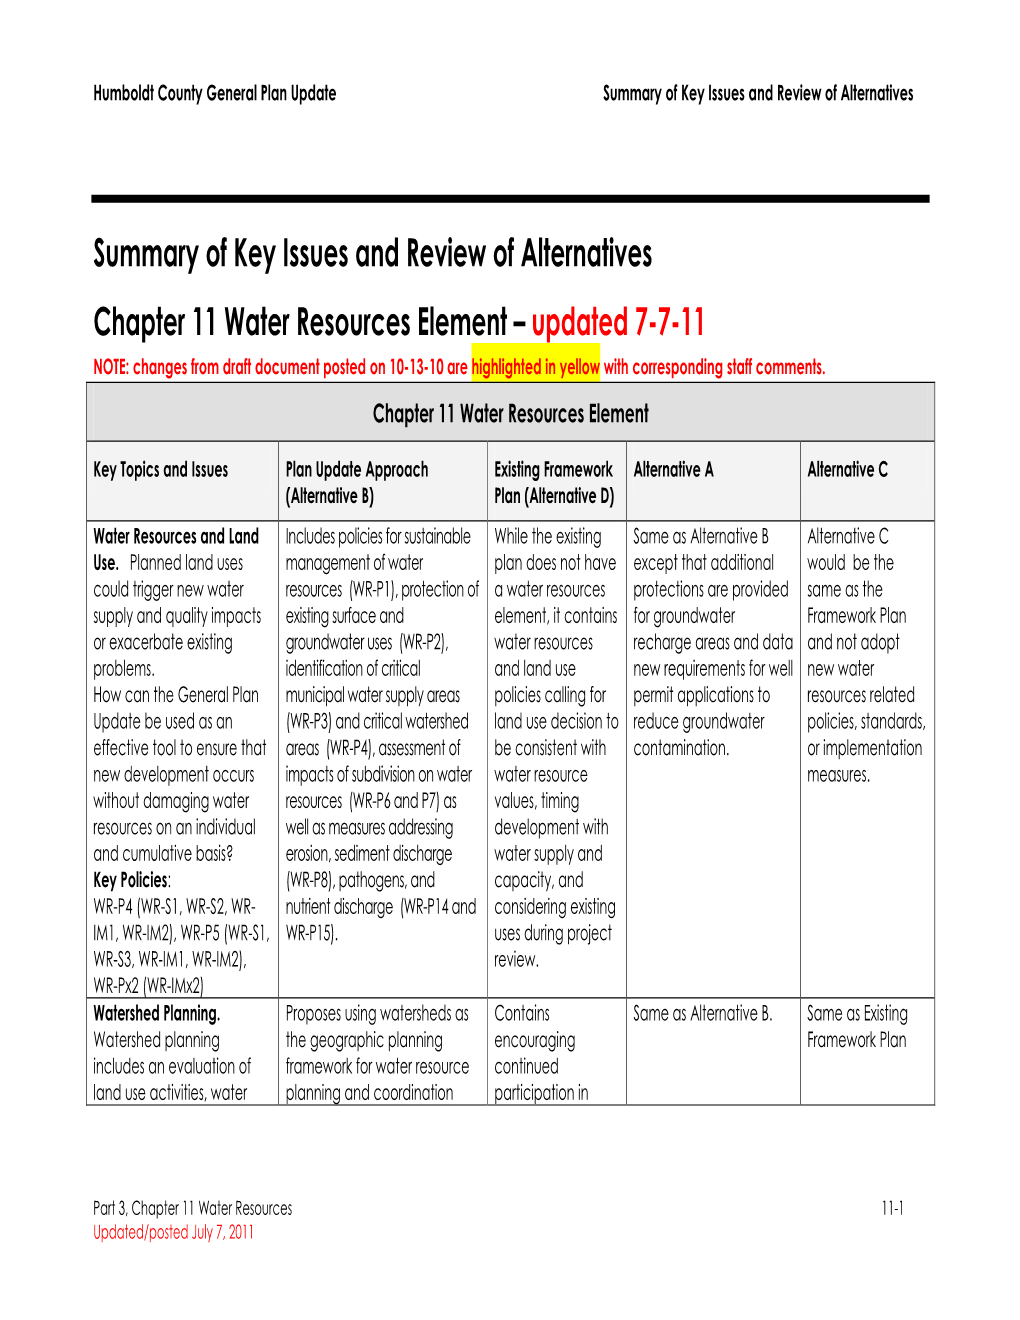 Water Resources Element – Updated 7-7-11 NOTE: Changes from Draft Document Posted on 10-13-10 Are Highlighted in Yellow with Corresponding Staff Comments